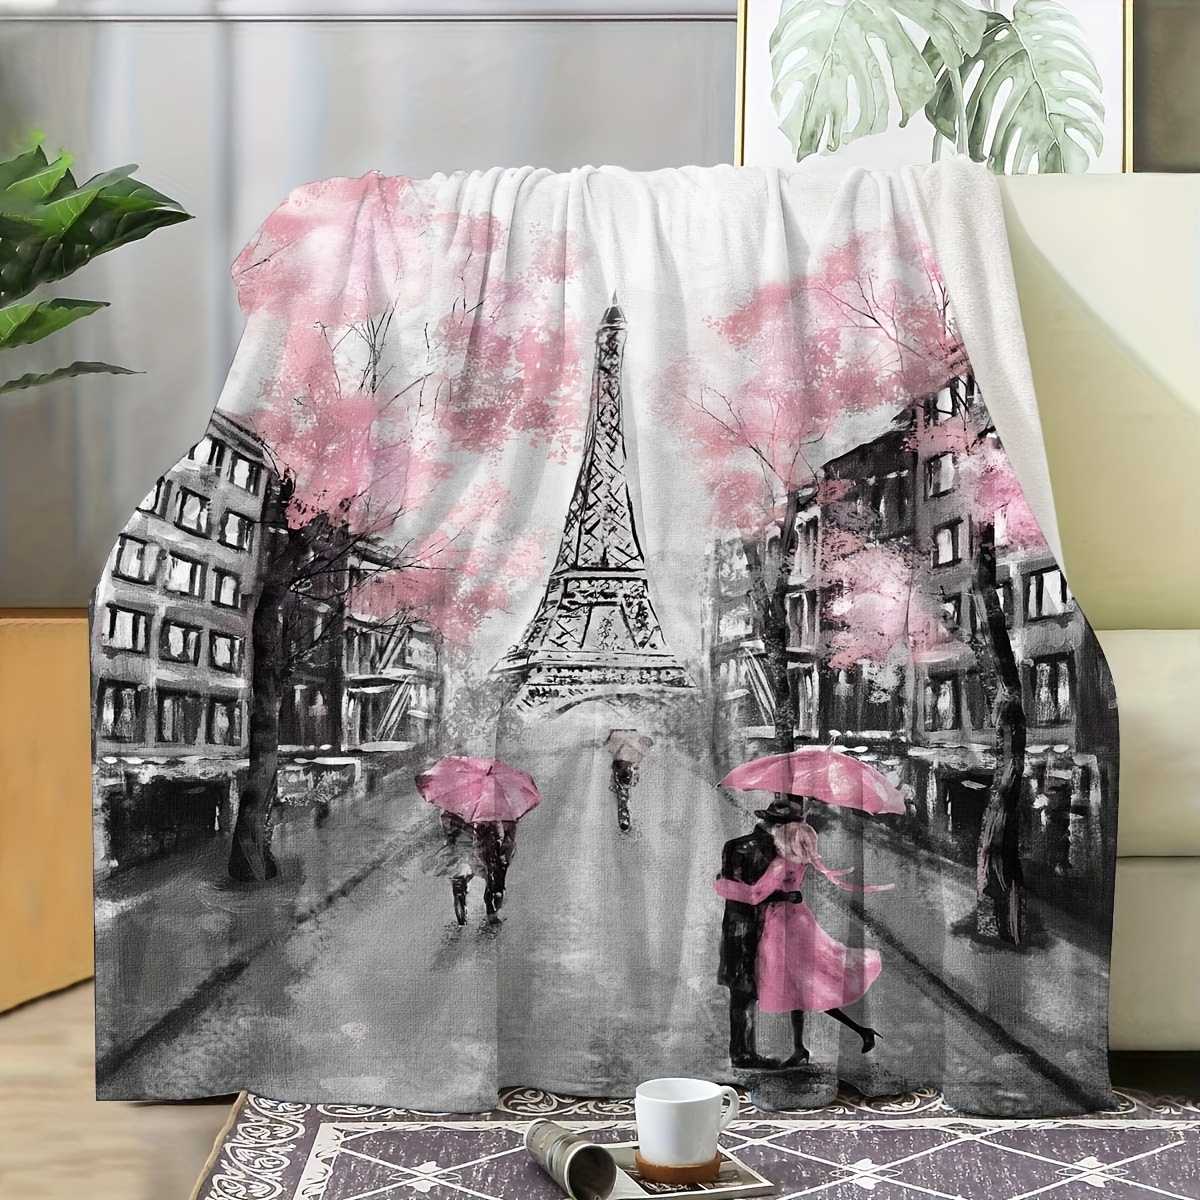 

Eiffel Tower Print Flannel Throw Blanket - Soft, Cozy & Allergy-friendly For Travel, Sofa, Bed, Office Decor - Perfect Birthday Gift For Boys, Girls, Adults - Versatile For All Seasons